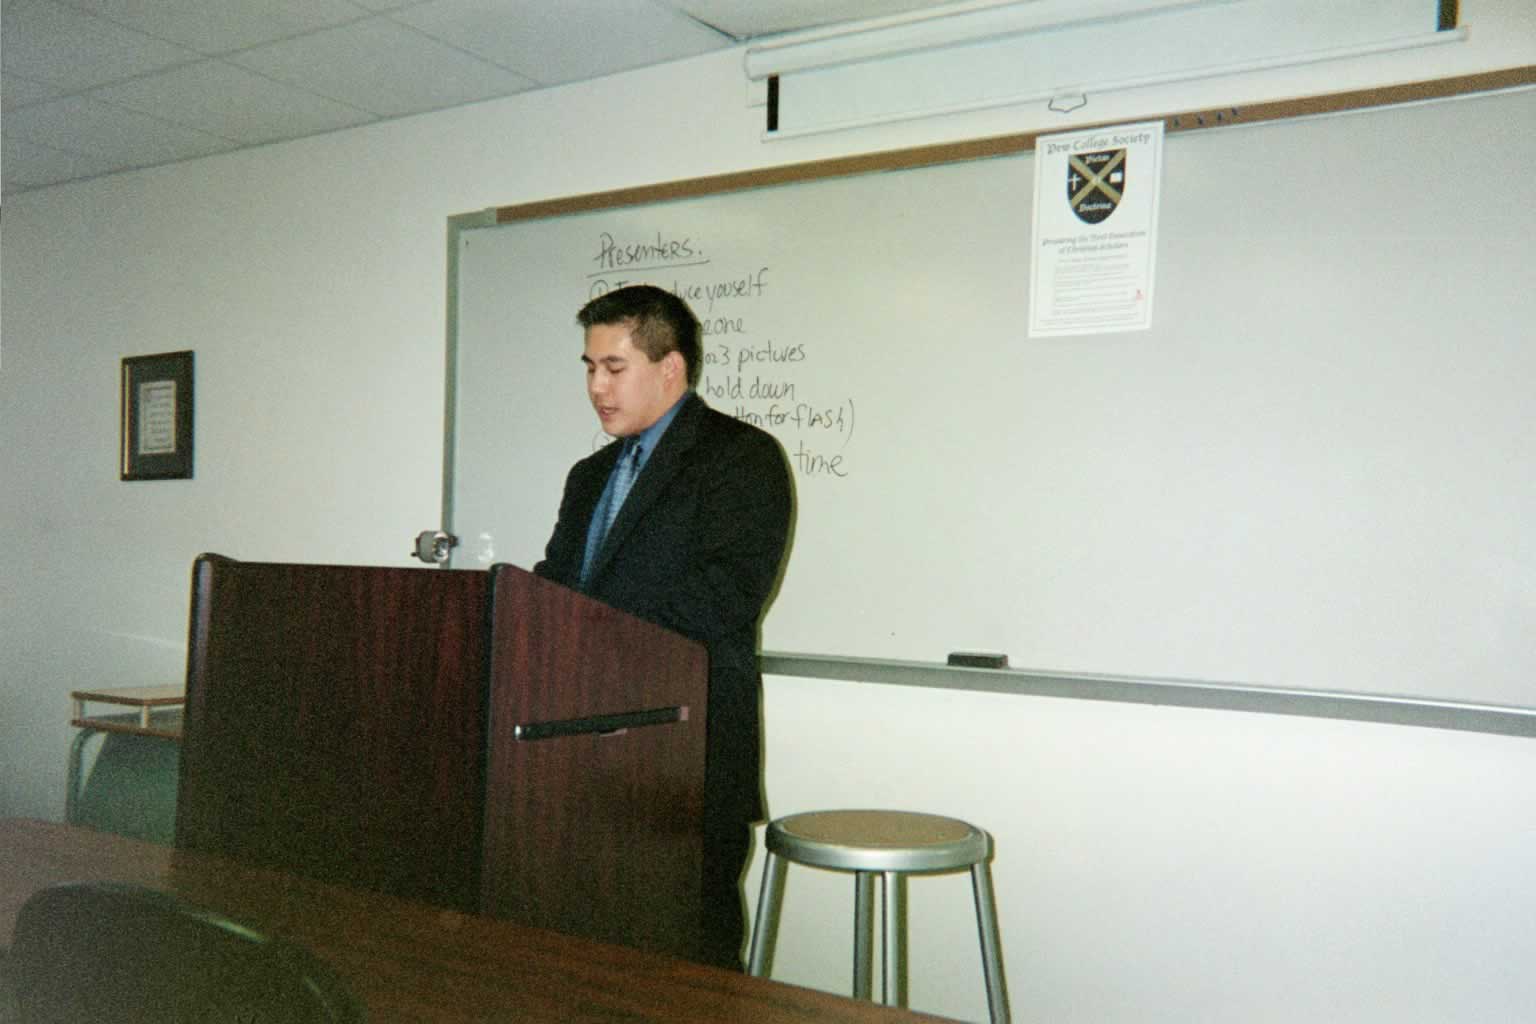 picture of a man in a suit standing behind a podium speaking